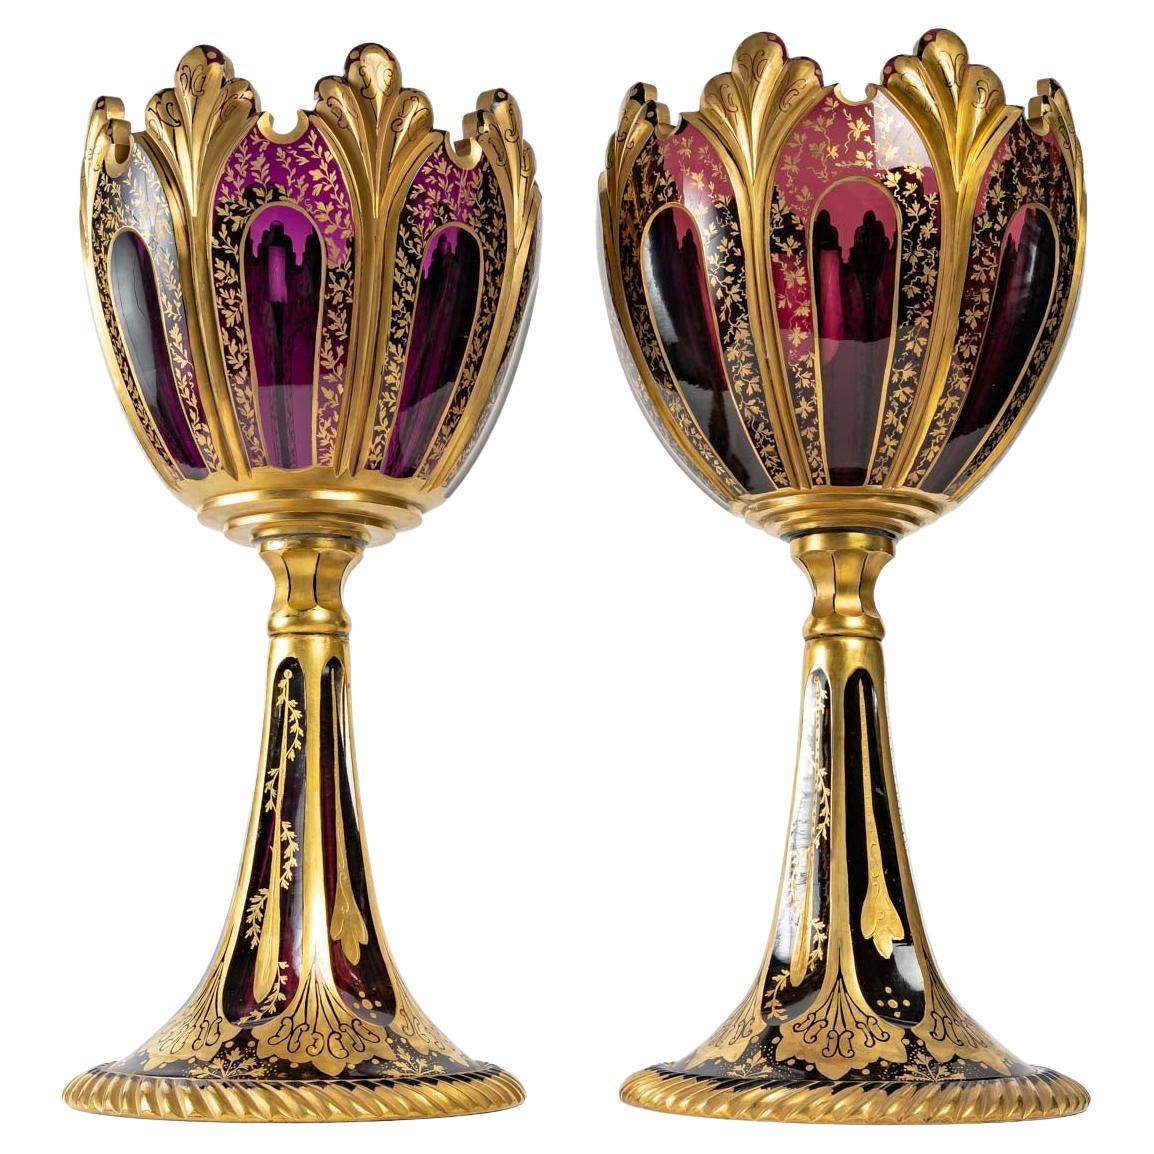 Important Pair of Bohemian Goblets, 19th Century